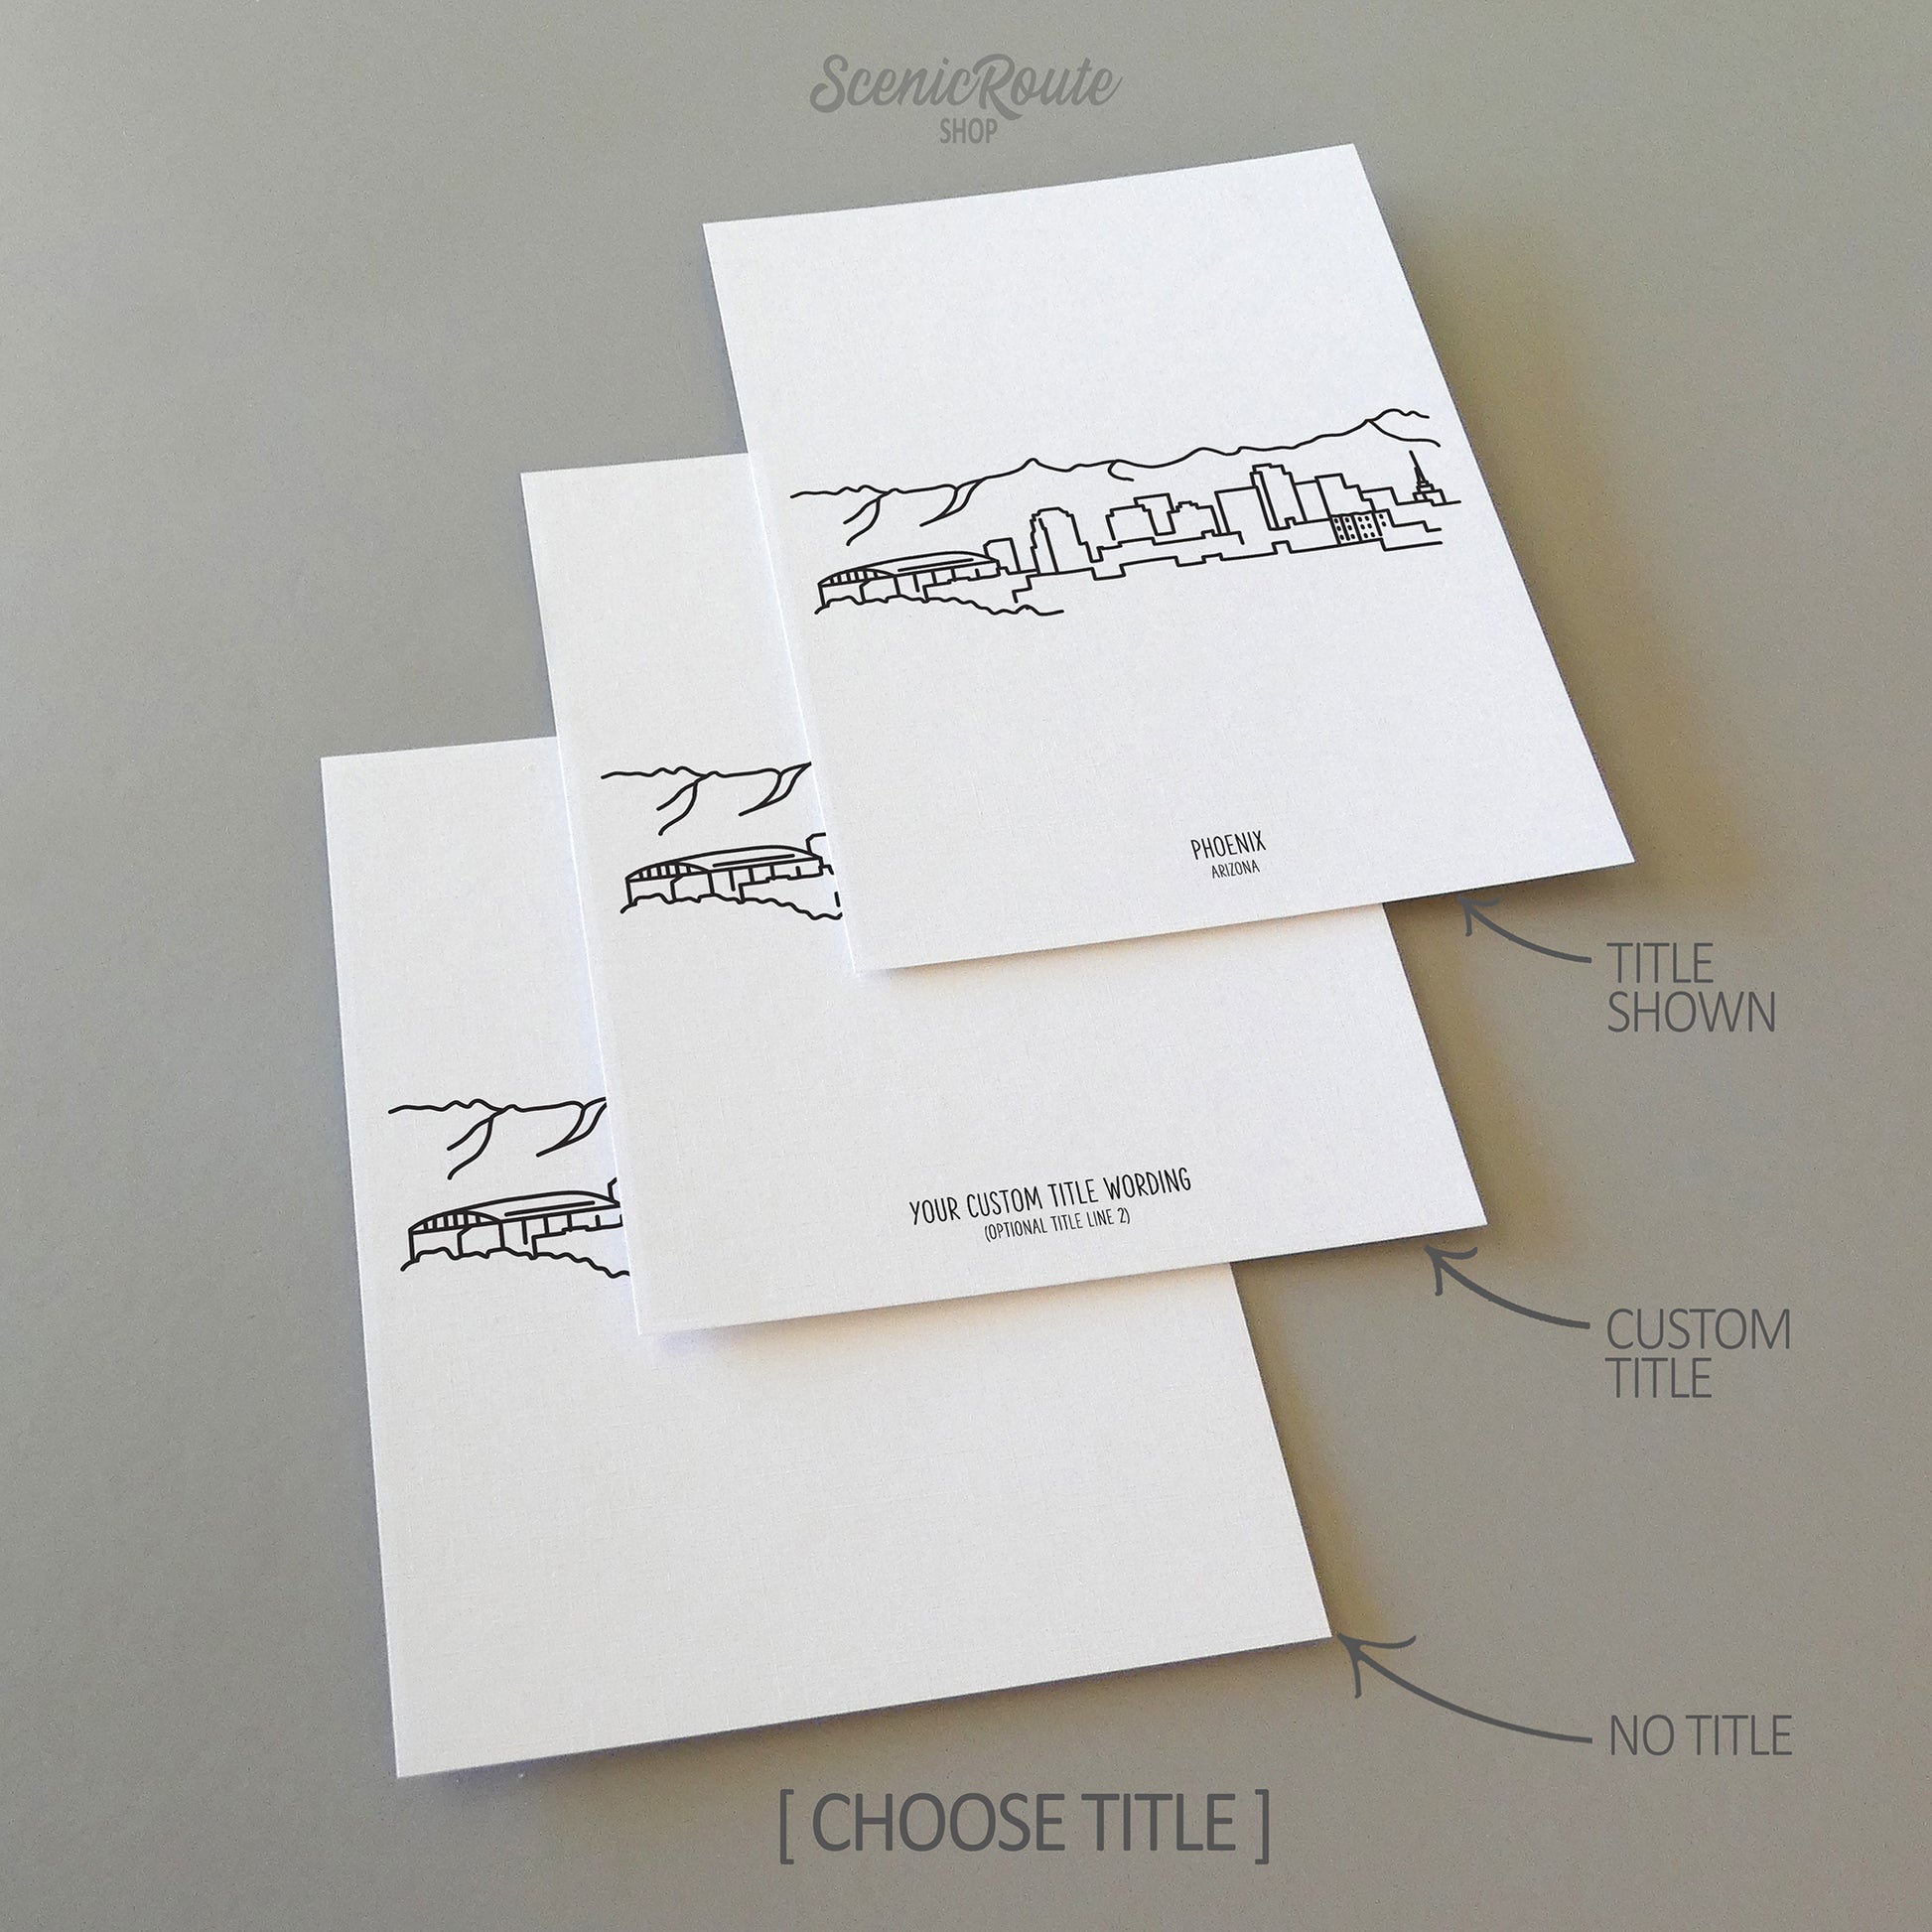 Three line art drawings of the Phoenix Arizona Skyline on white linen paper with a gray background. The pieces are shown with title options that can be chosen and personalized.